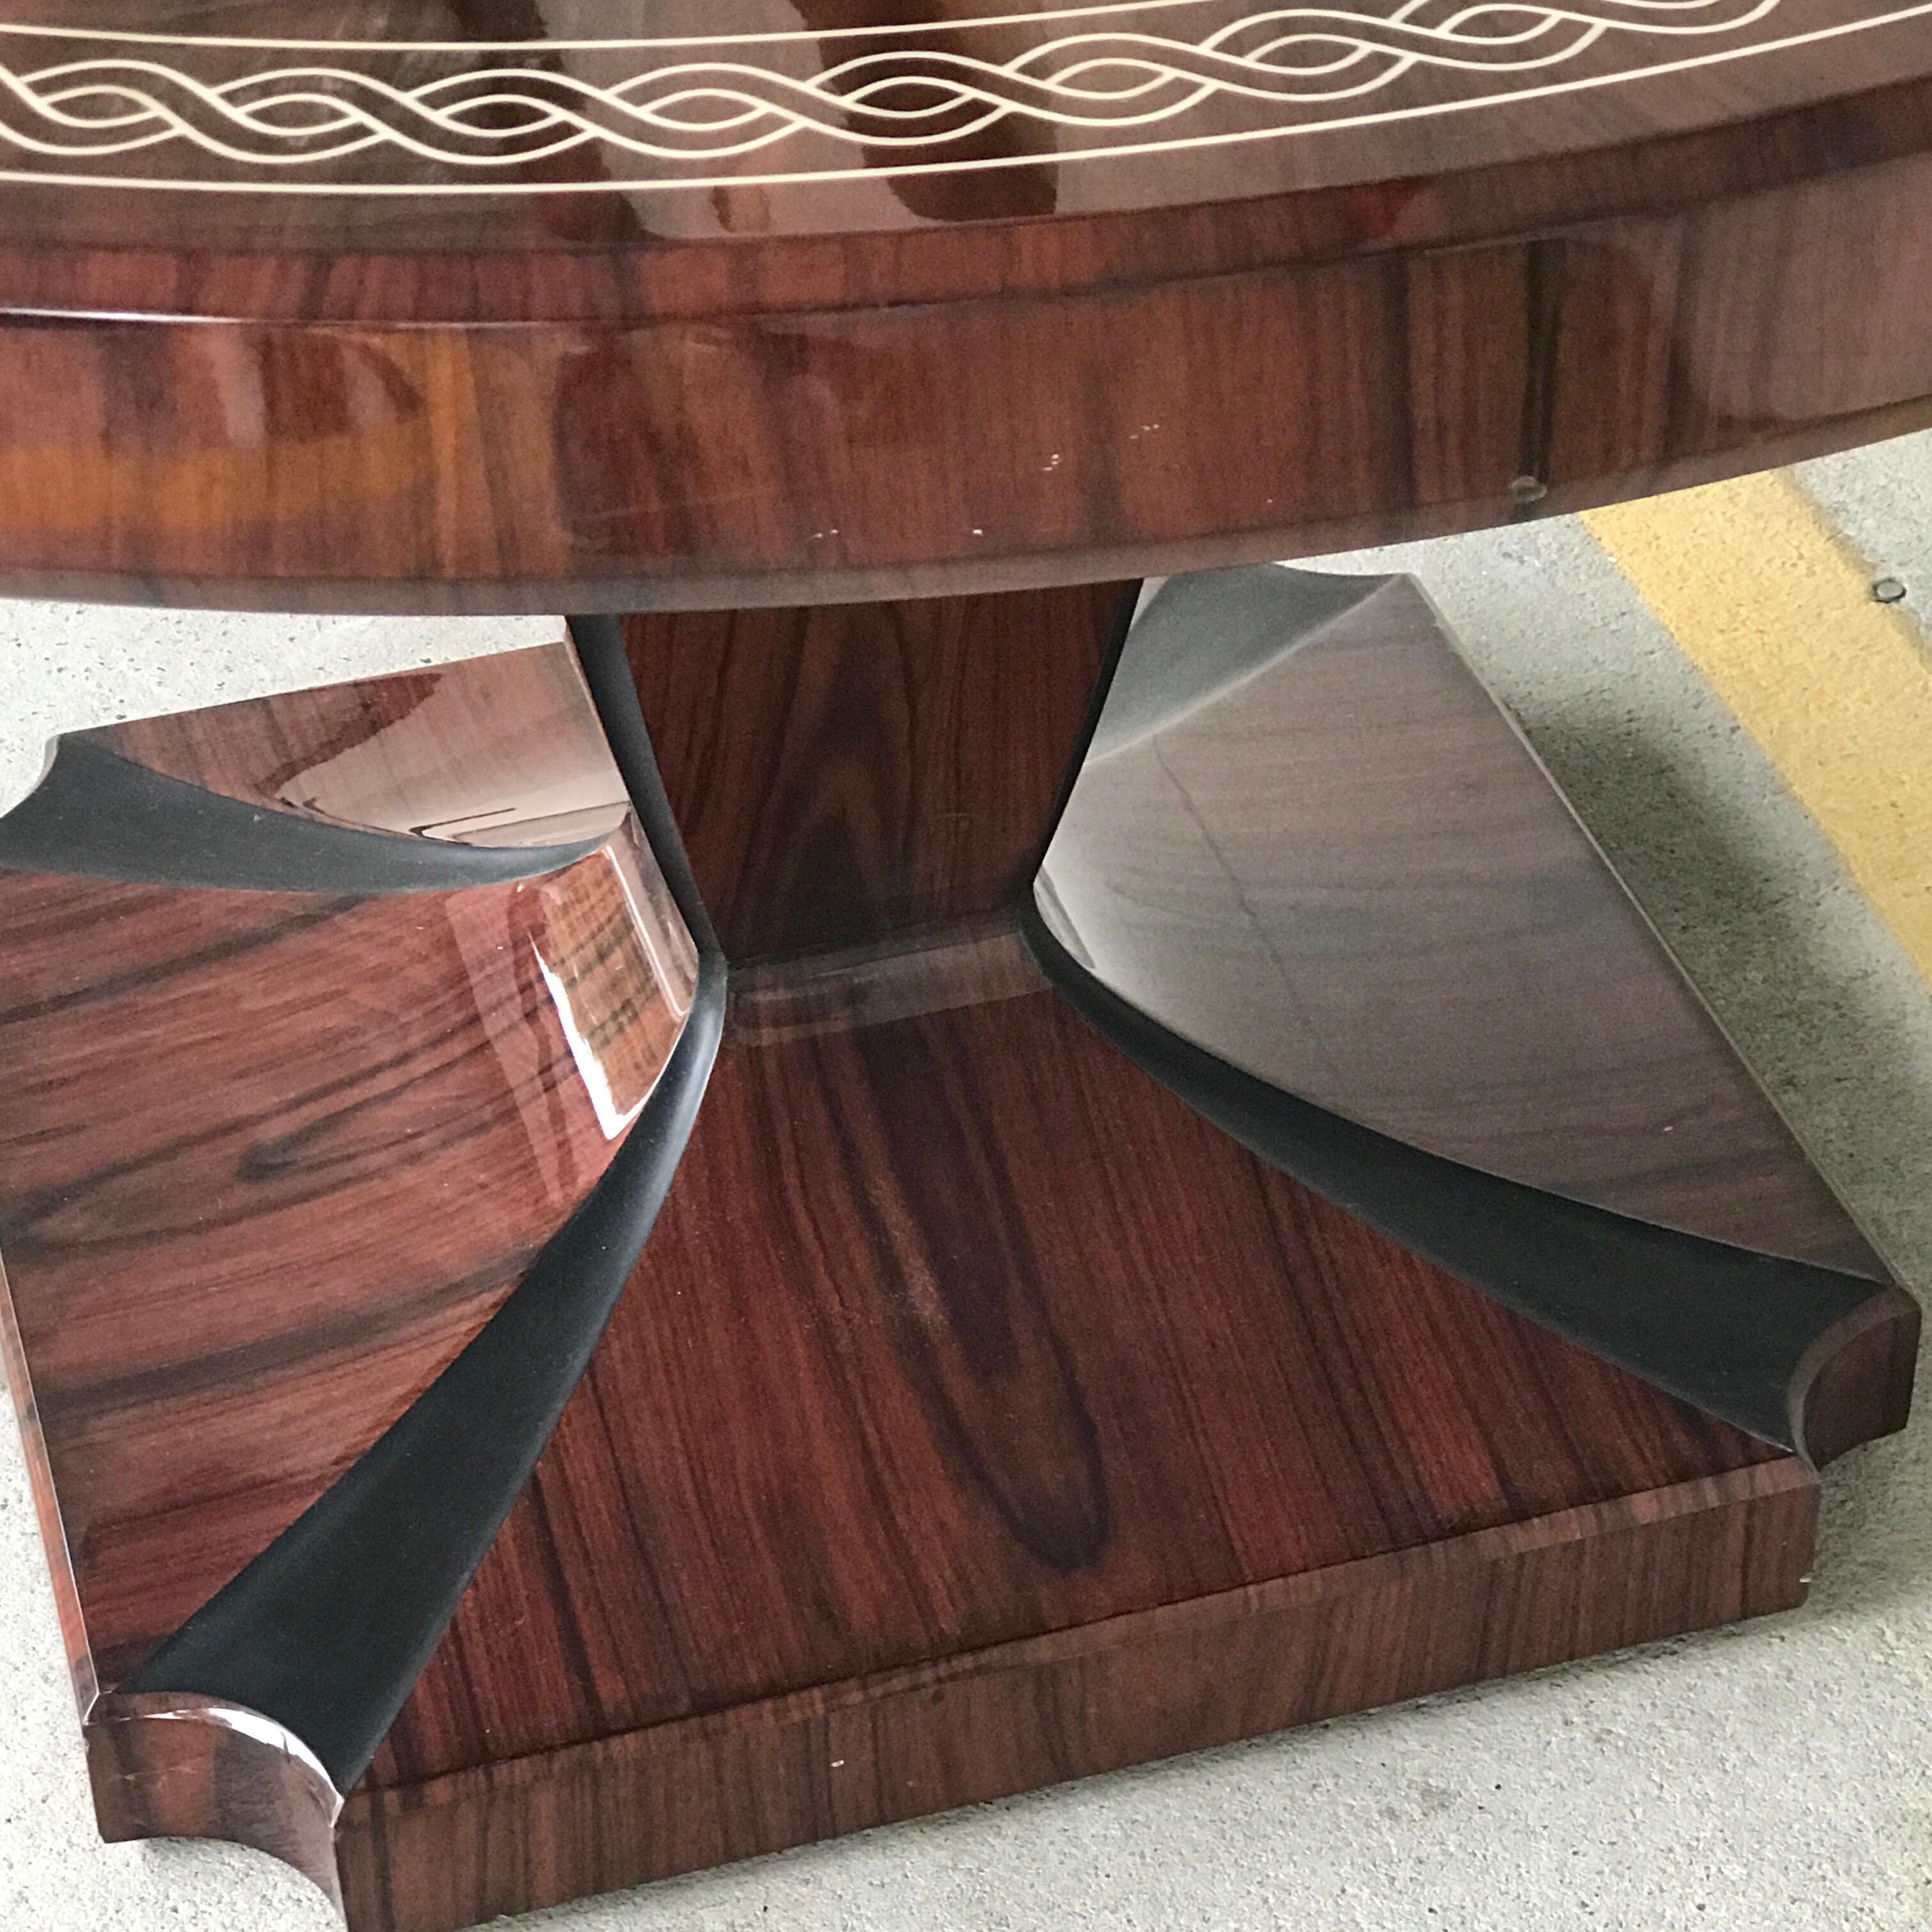 20th Century Art Deco Style Rosewood Centre Table with Lacquer Inlay